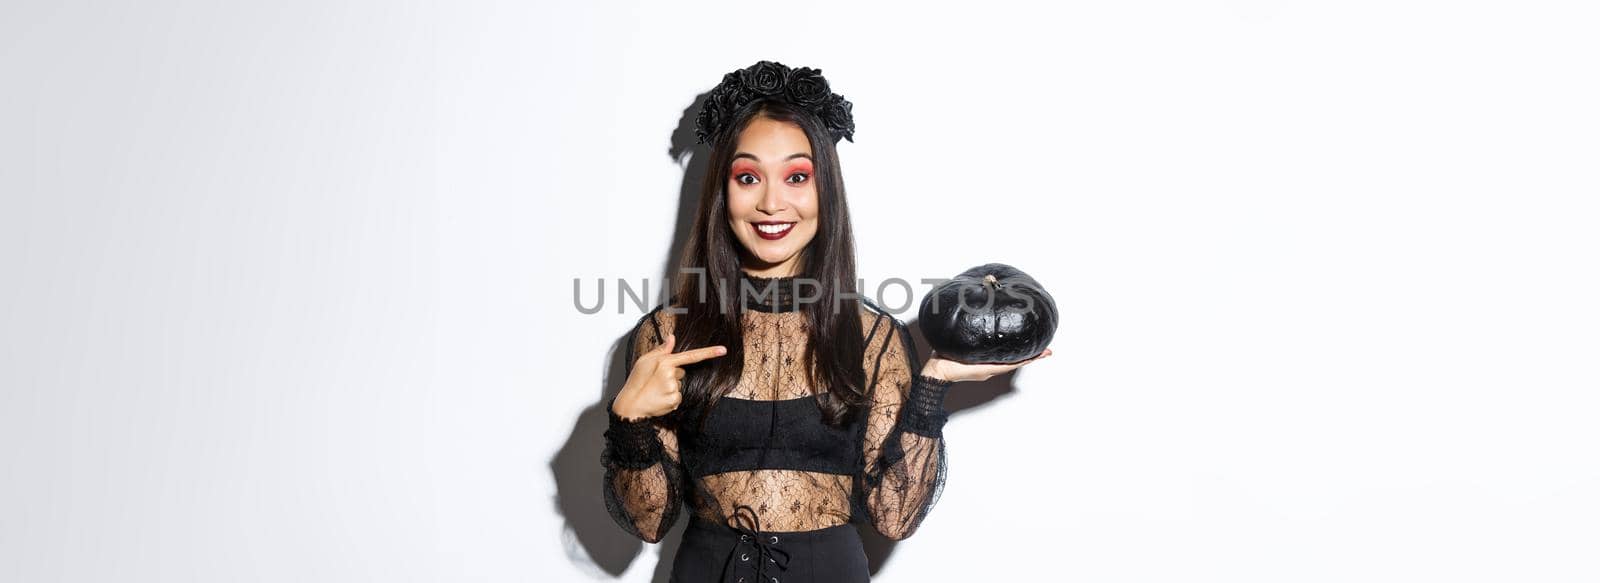 Surprised happy asian woman in witch costume pointing finger at black pumpkin, smiling amused, getting ready for halloween party, standing over white background by Benzoix